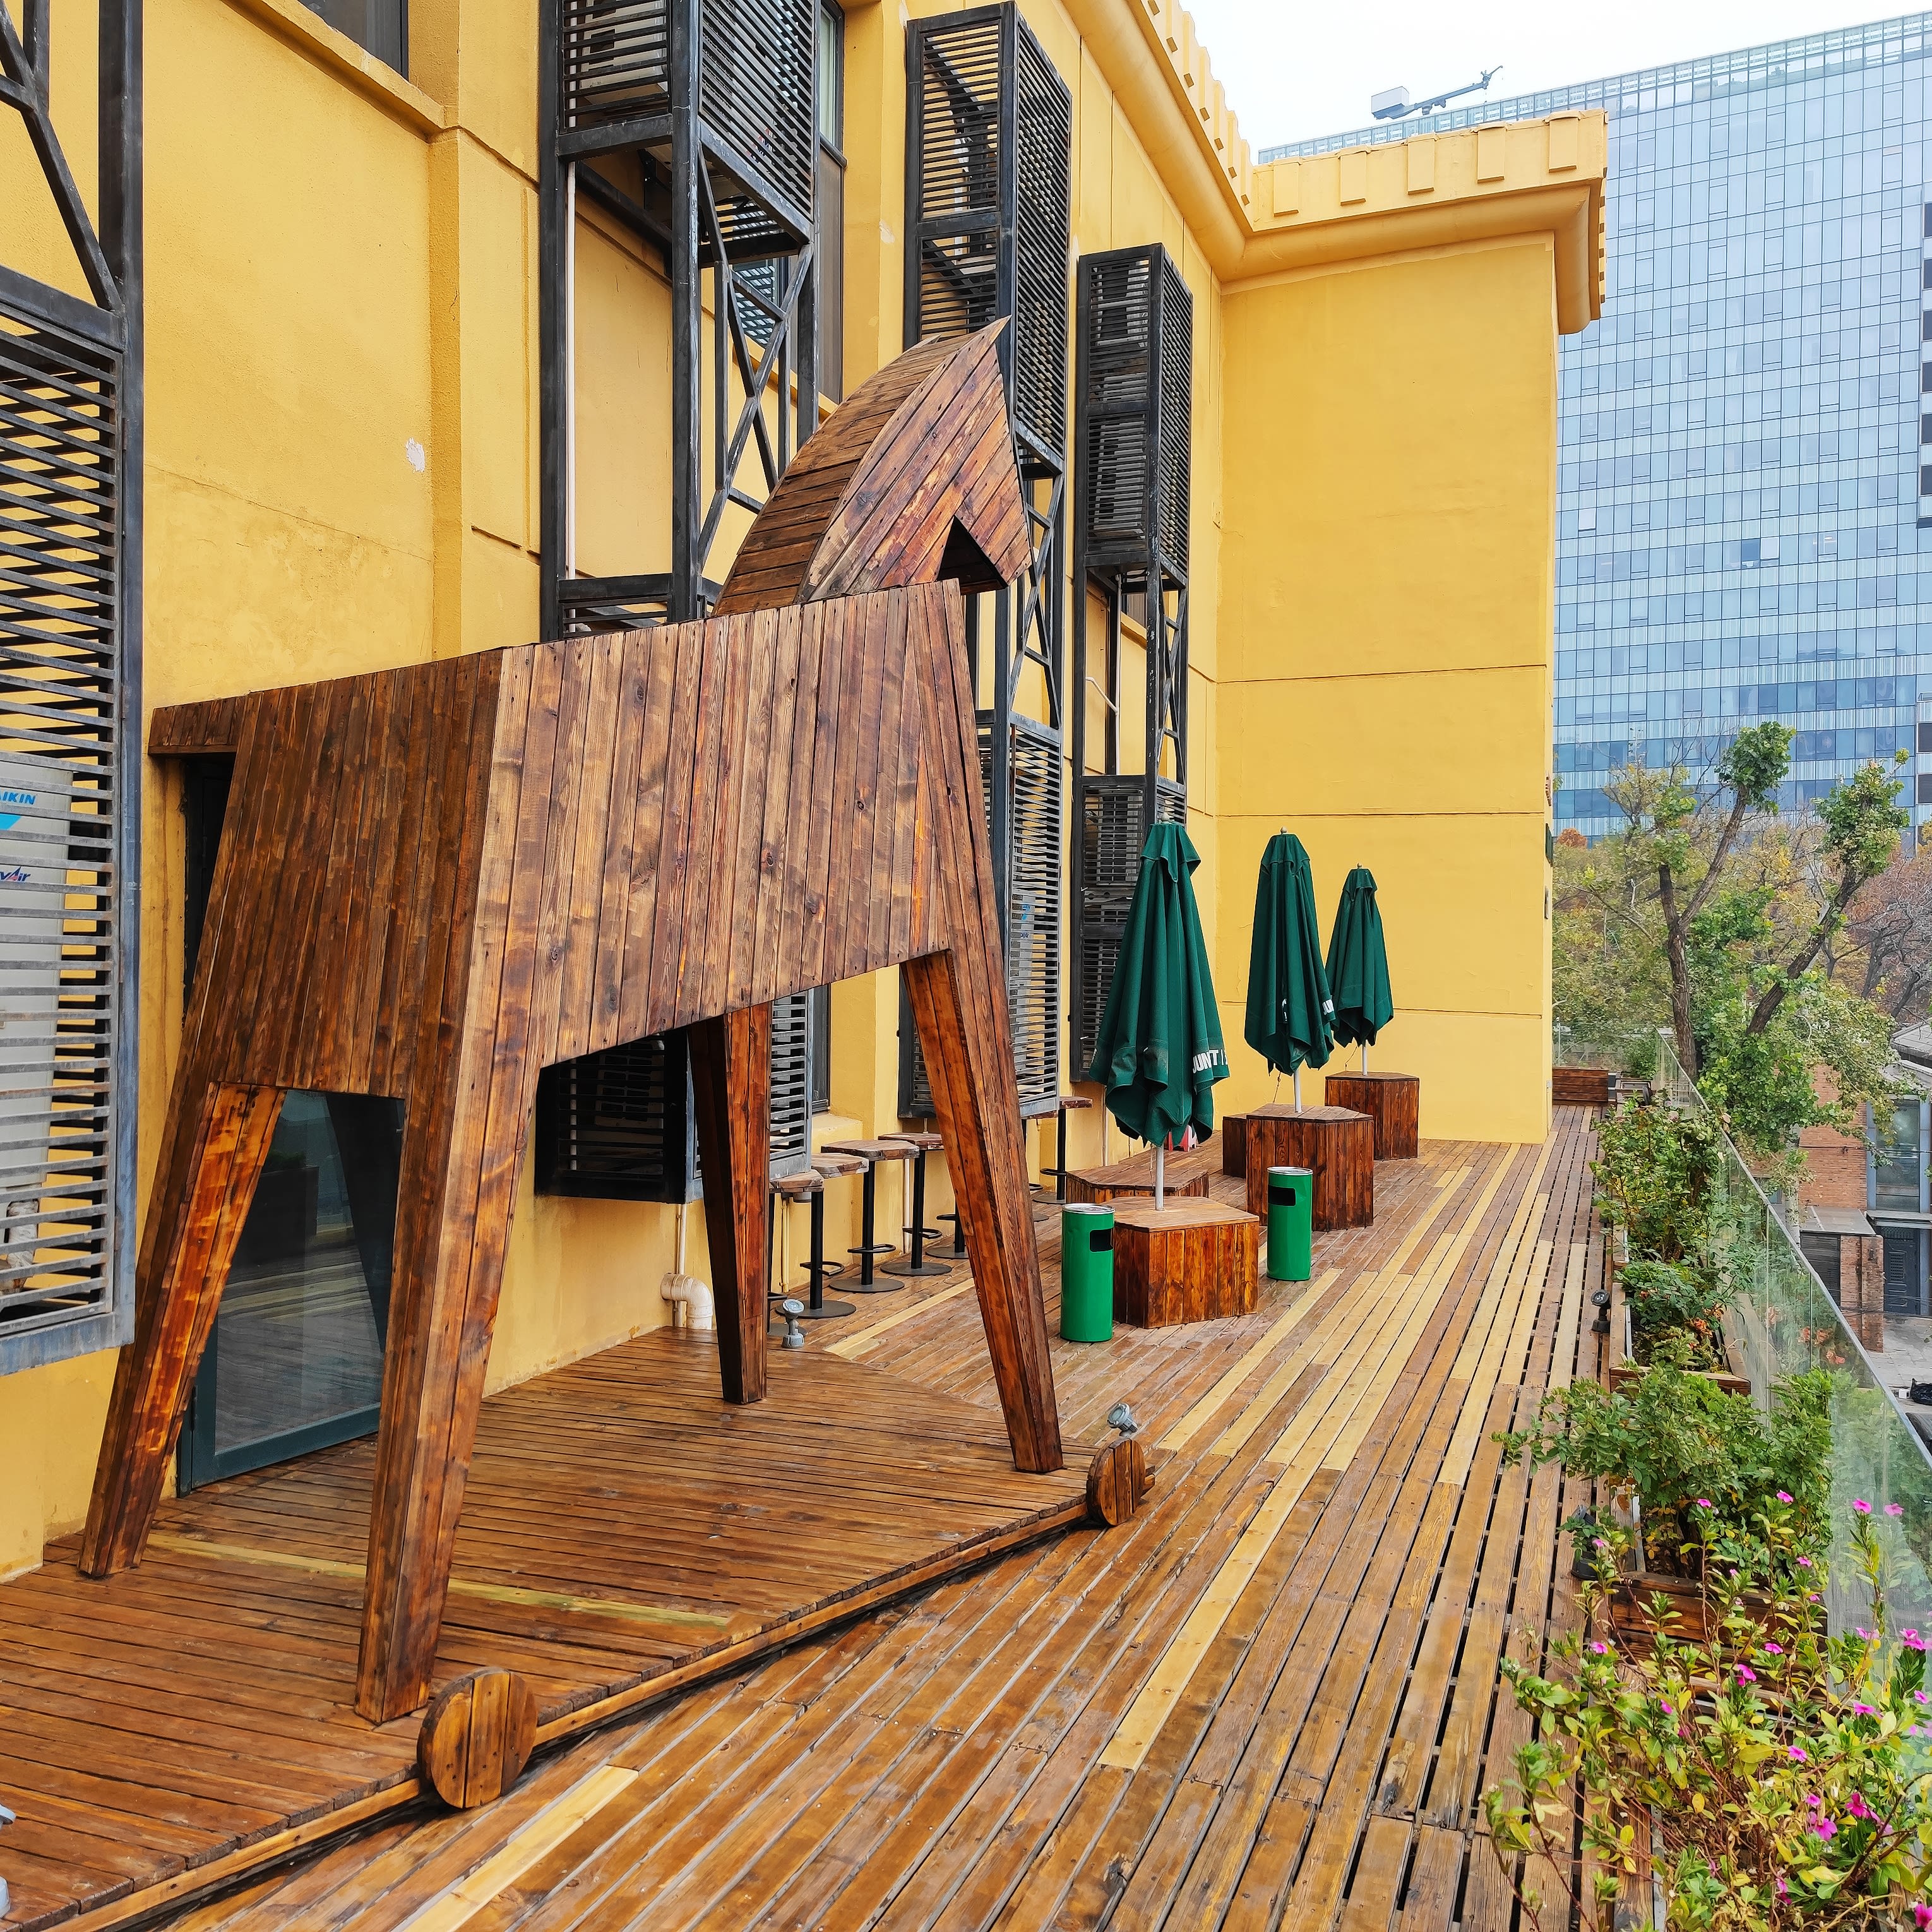 Picture of the wooden horse, the brand logo of Jung von Matt, standing on the terrace on the third floor of JvM's office building in Beijing.